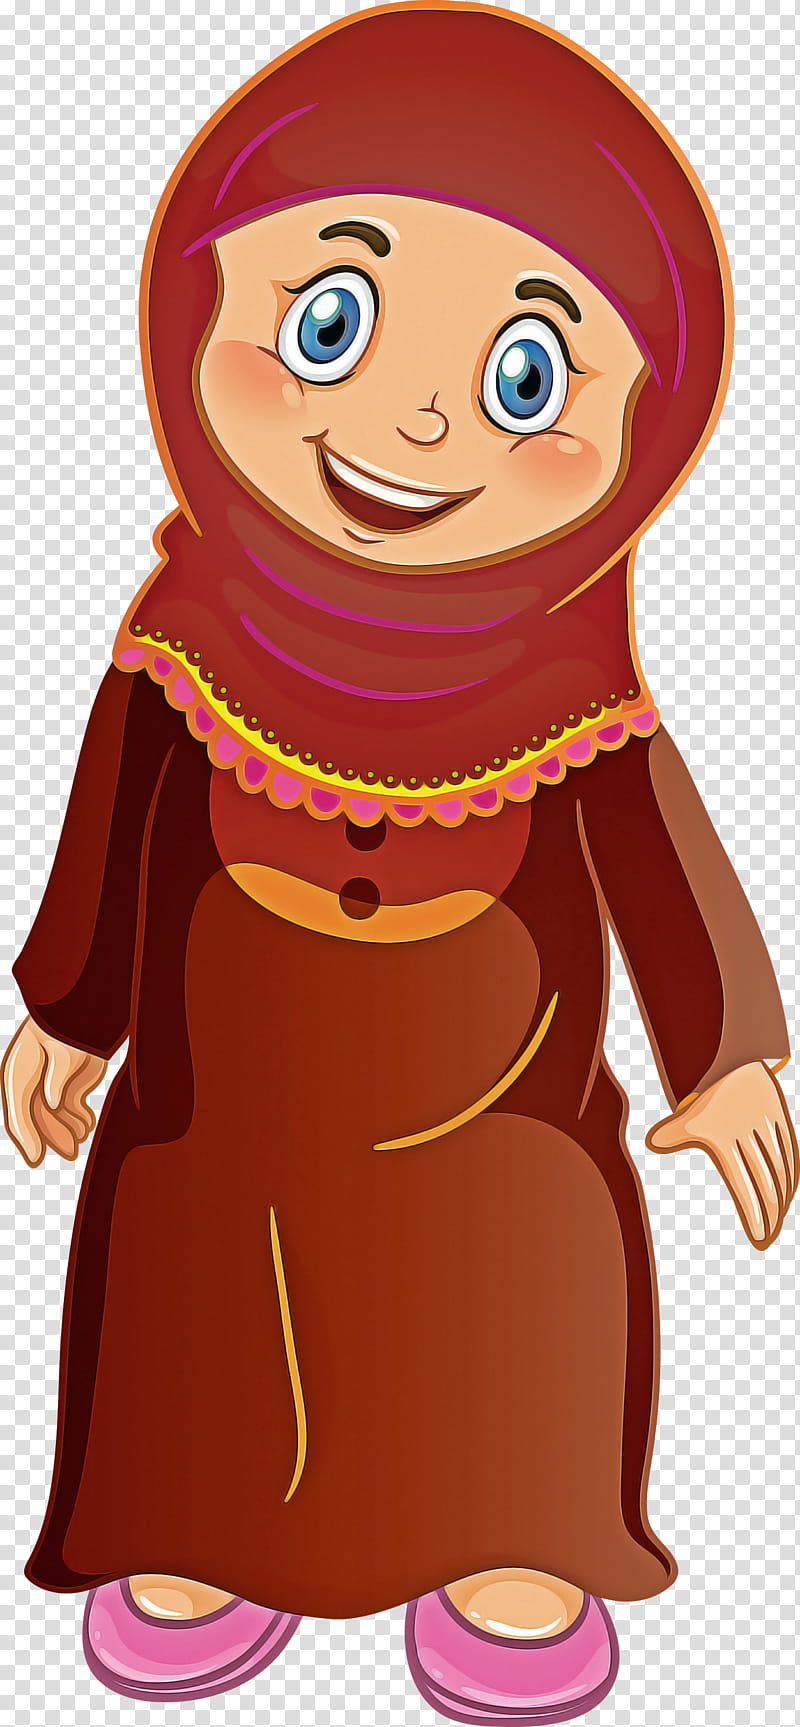 Muslim People, Cartoon, Animation, Smile, Gesture transparent background PNG clipart